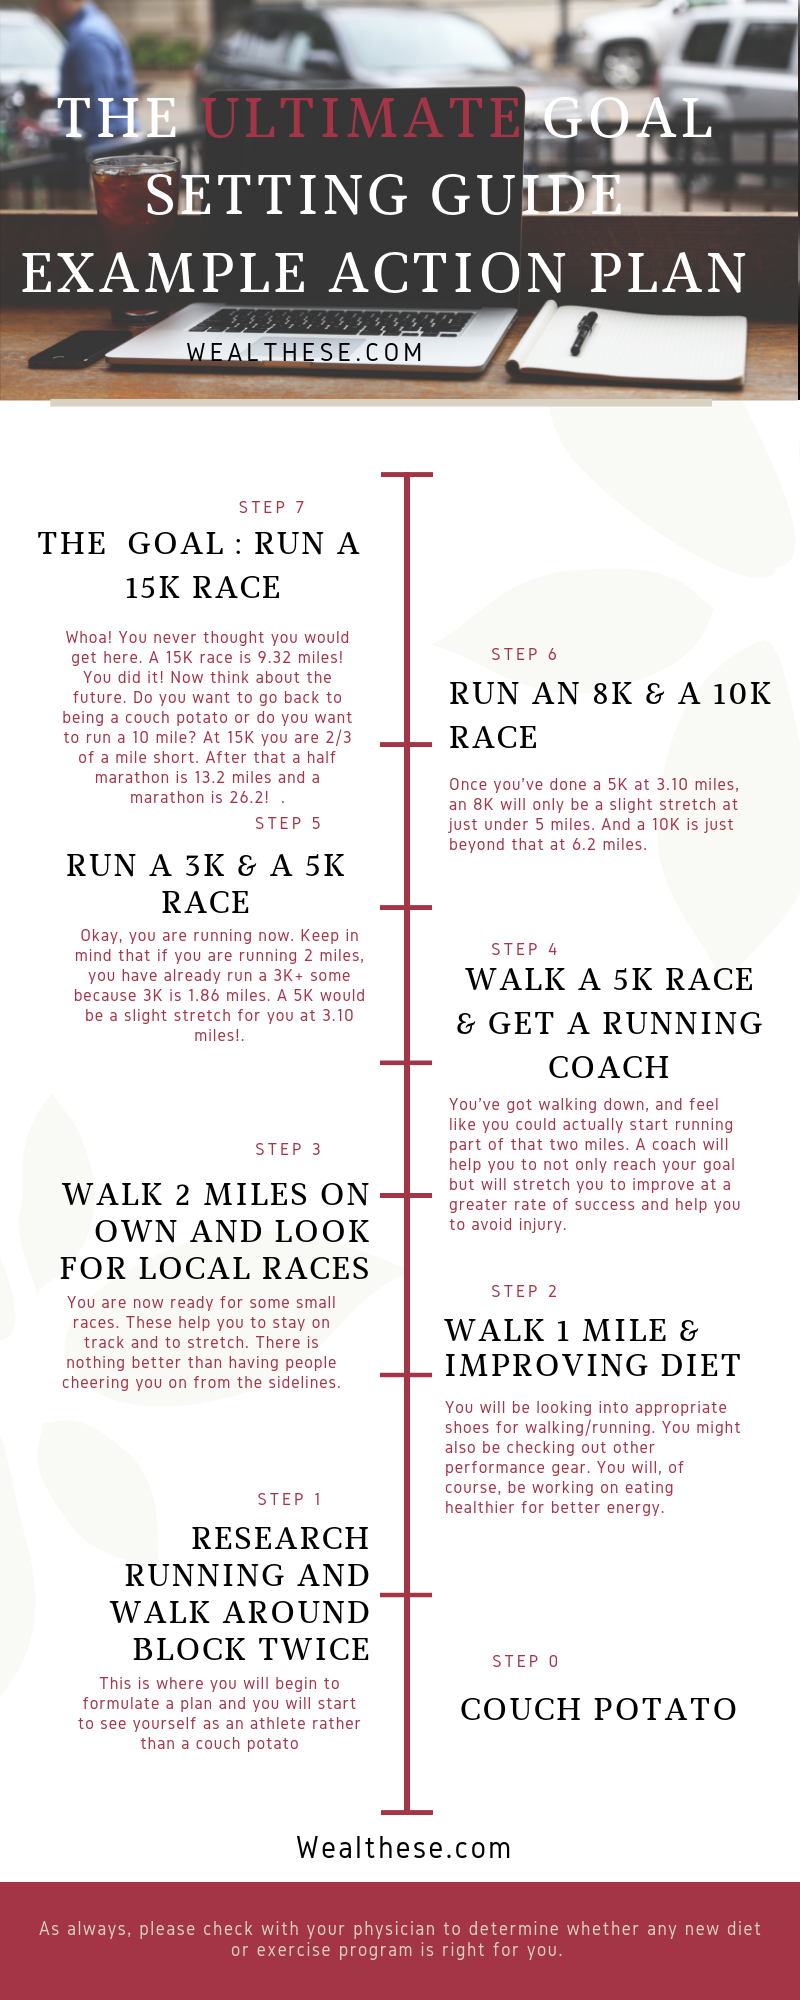 The Ultimate Goal Setting Sheet Guide with Action Steps for getting from couch potato to running a 15k